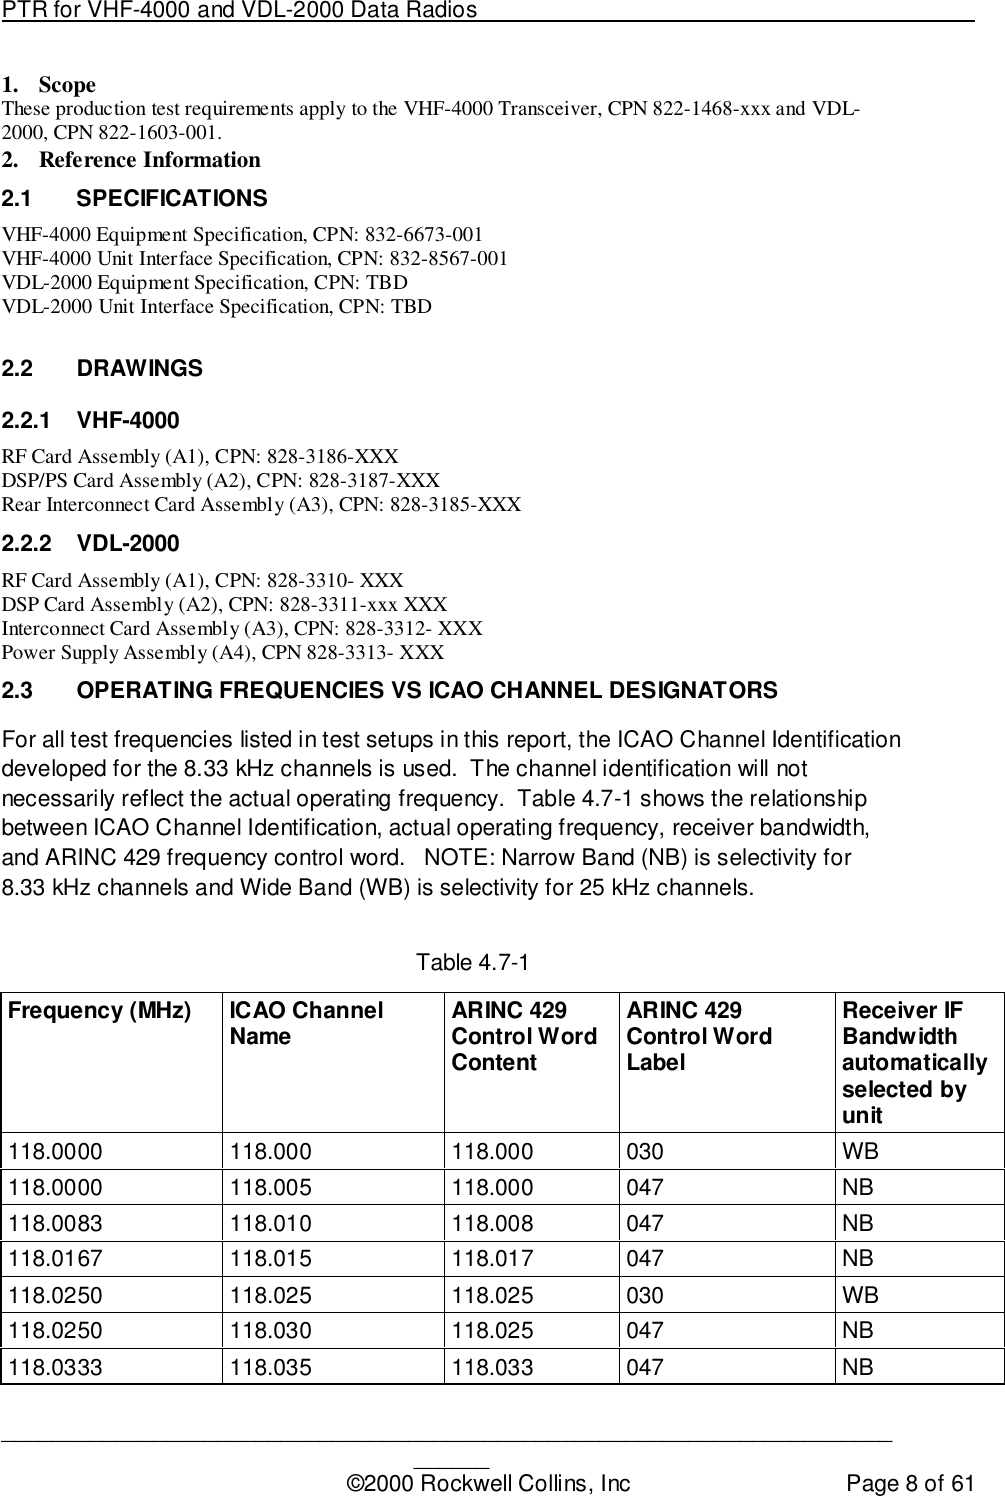 PTR for VHF-4000 and VDL-2000 Data Radios                                                                                ____________________________________________________________________________©2000 Rockwell Collins, Inc Page 8 of 611. ScopeThese production test requirements apply to the VHF-4000 Transceiver, CPN 822-1468-xxx and VDL-2000, CPN 822-1603-001.2. Reference Information2.1 SPECIFICATIONSVHF-4000 Equipment Specification, CPN: 832-6673-001VHF-4000 Unit Interface Specification, CPN: 832-8567-001VDL-2000 Equipment Specification, CPN: TBDVDL-2000 Unit Interface Specification, CPN: TBD2.2 DRAWINGS2.2.1 VHF-4000RF Card Assembly (A1), CPN: 828-3186-XXXDSP/PS Card Assembly (A2), CPN: 828-3187-XXXRear Interconnect Card Assembly (A3), CPN: 828-3185-XXX2.2.2 VDL-2000RF Card Assembly (A1), CPN: 828-3310- XXXDSP Card Assembly (A2), CPN: 828-3311-xxx XXXInterconnect Card Assembly (A3), CPN: 828-3312- XXXPower Supply Assembly (A4), CPN 828-3313- XXX2.3  OPERATING FREQUENCIES VS ICAO CHANNEL DESIGNATORSFor all test frequencies listed in test setups in this report, the ICAO Channel Identificationdeveloped for the 8.33 kHz channels is used.  The channel identification will notnecessarily reflect the actual operating frequency.  Table 4.7-1 shows the relationshipbetween ICAO Channel Identification, actual operating frequency, receiver bandwidth,and ARINC 429 frequency control word.   NOTE: Narrow Band (NB) is selectivity for8.33 kHz channels and Wide Band (WB) is selectivity for 25 kHz channels.Table 4.7-1Frequency (MHz) ICAO ChannelName ARINC 429Control WordContentARINC 429Control WordLabelReceiver IFBandwidthautomaticallyselected byunit118.0000 118.000 118.000 030 WB118.0000 118.005 118.000 047 NB118.0083 118.010 118.008 047 NB118.0167 118.015 118.017 047 NB118.0250 118.025 118.025 030 WB118.0250 118.030 118.025 047 NB118.0333 118.035 118.033 047 NB